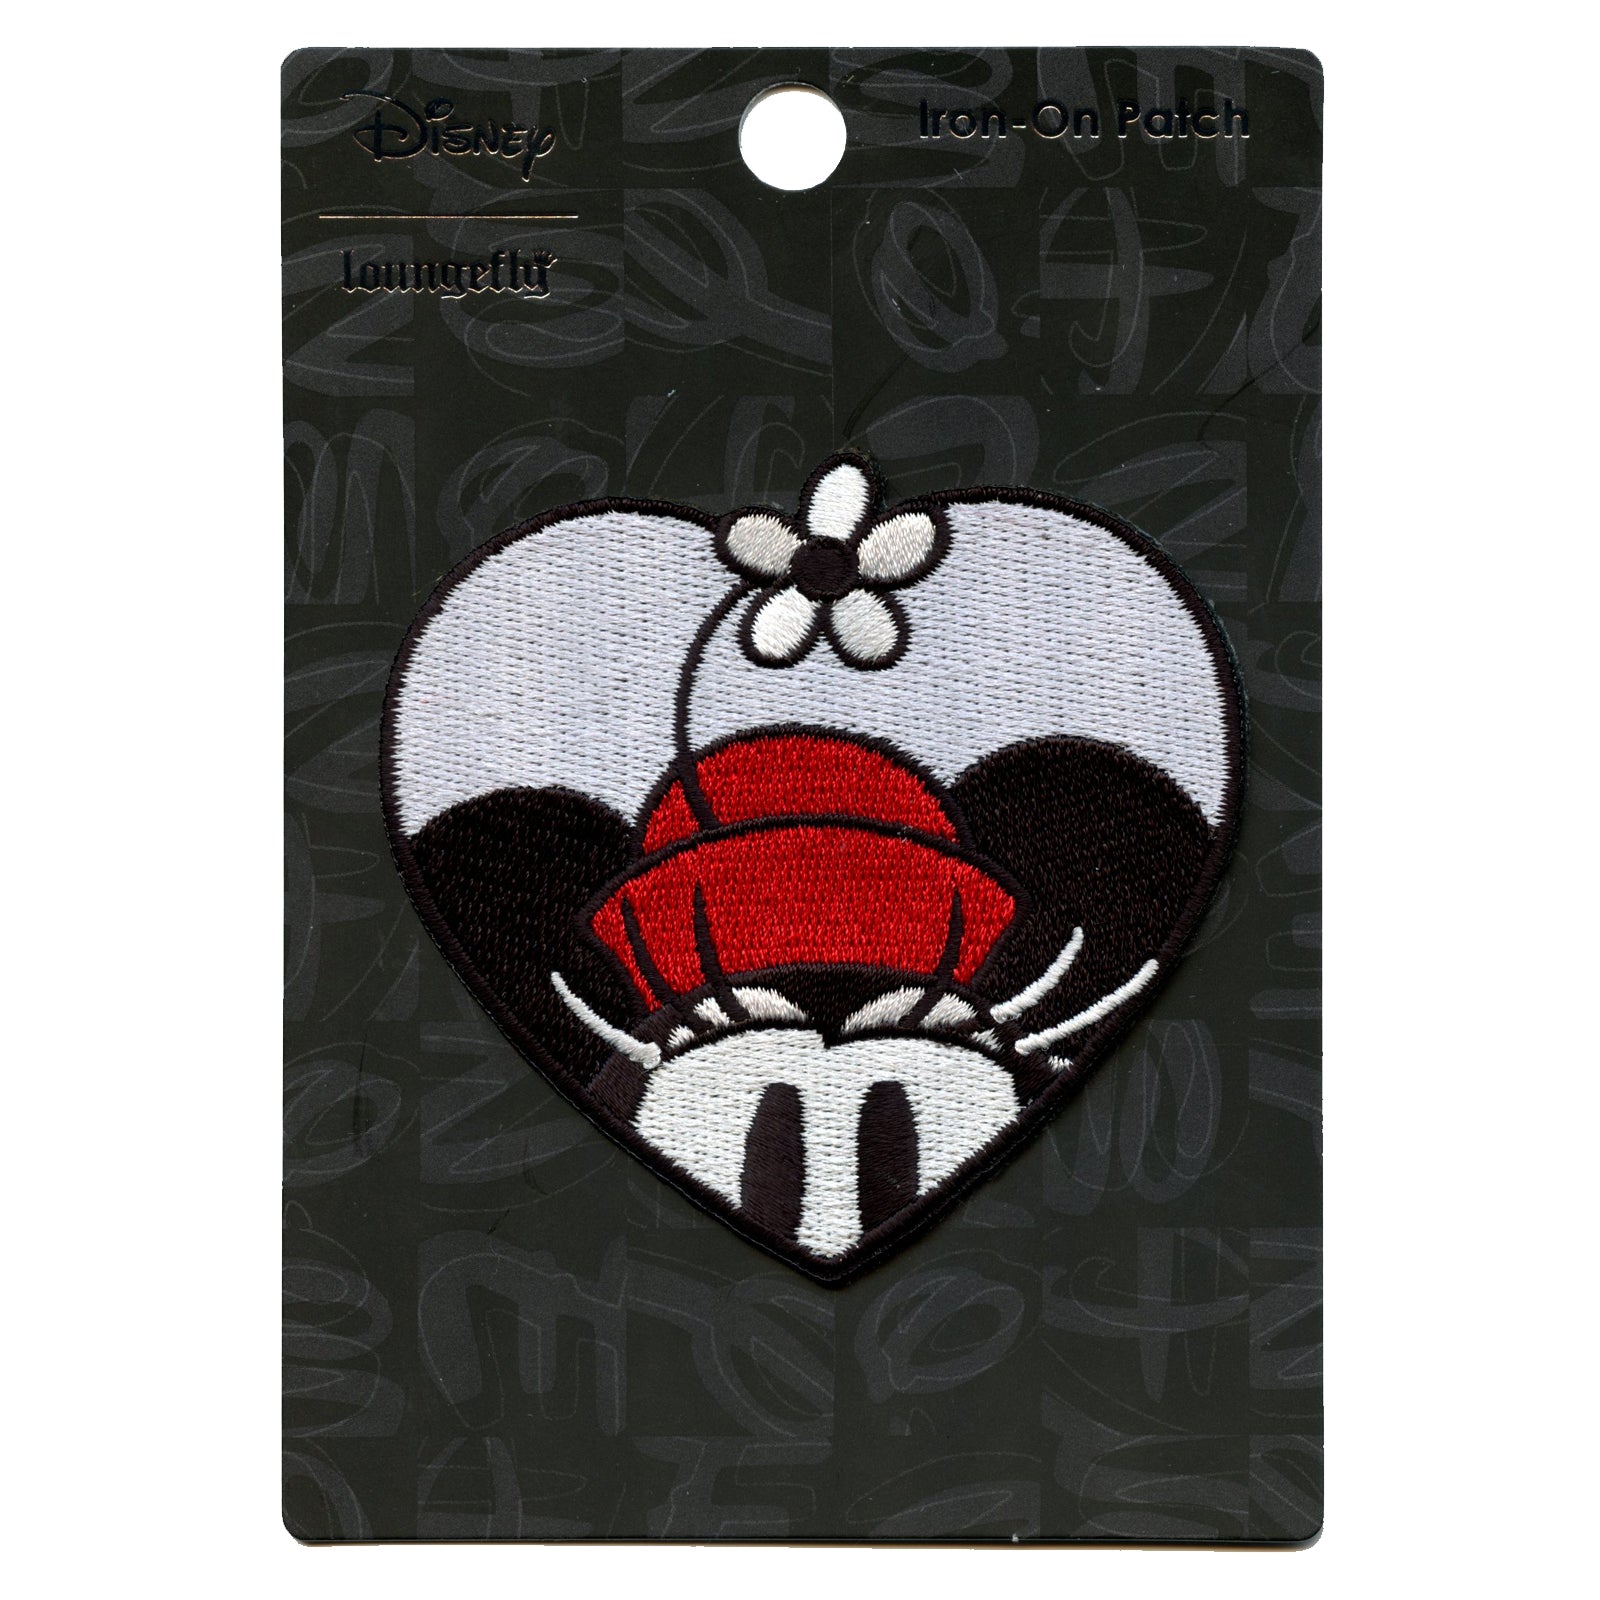 Classic MICKEY MOUSE & Minnie Disney Embroidered PATCHES 5 pcs. Iron on